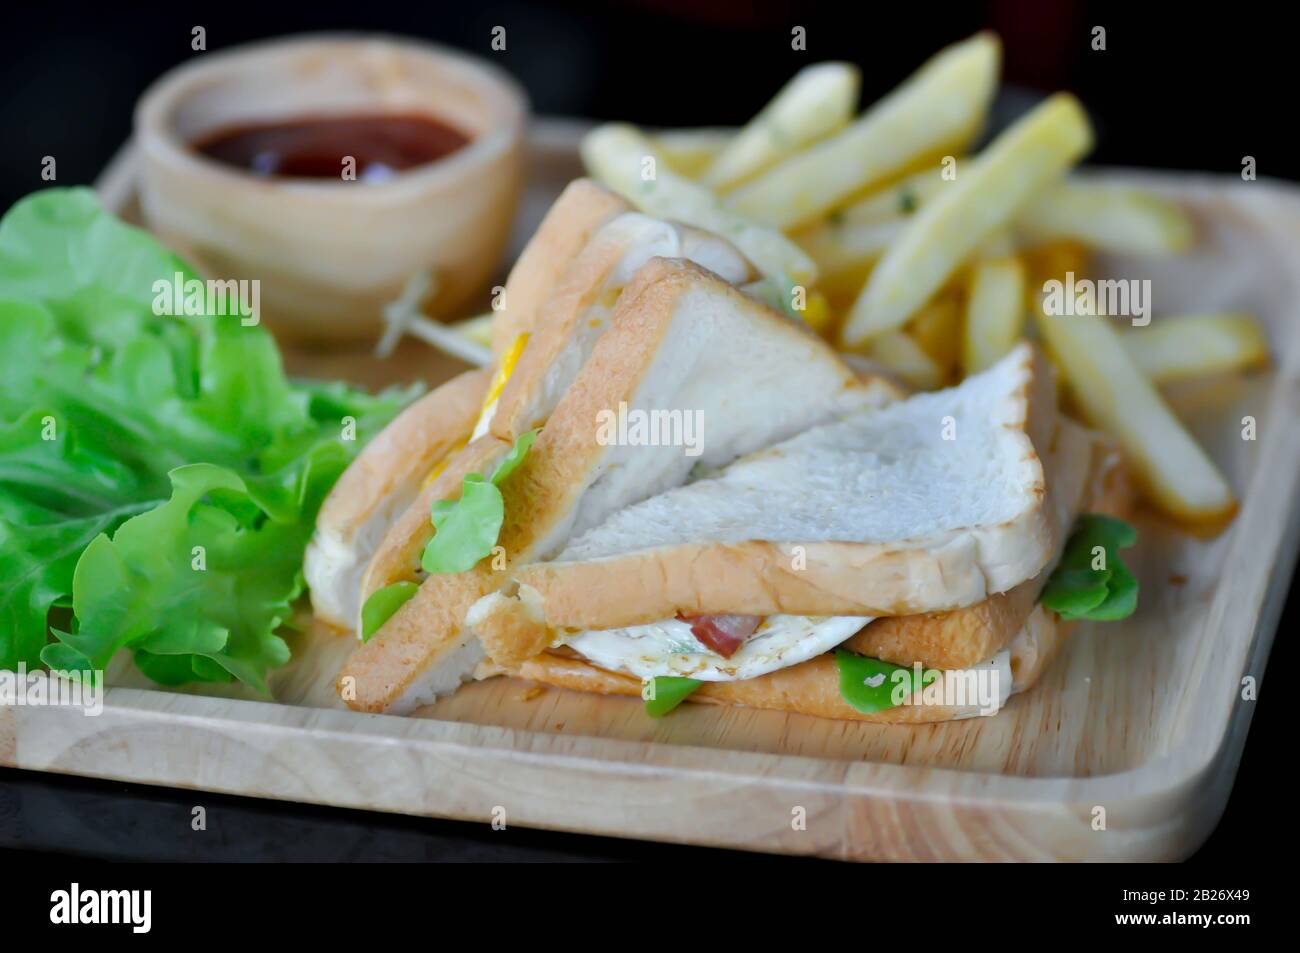 sandwich or egg sandwich and French fries Stock Photo